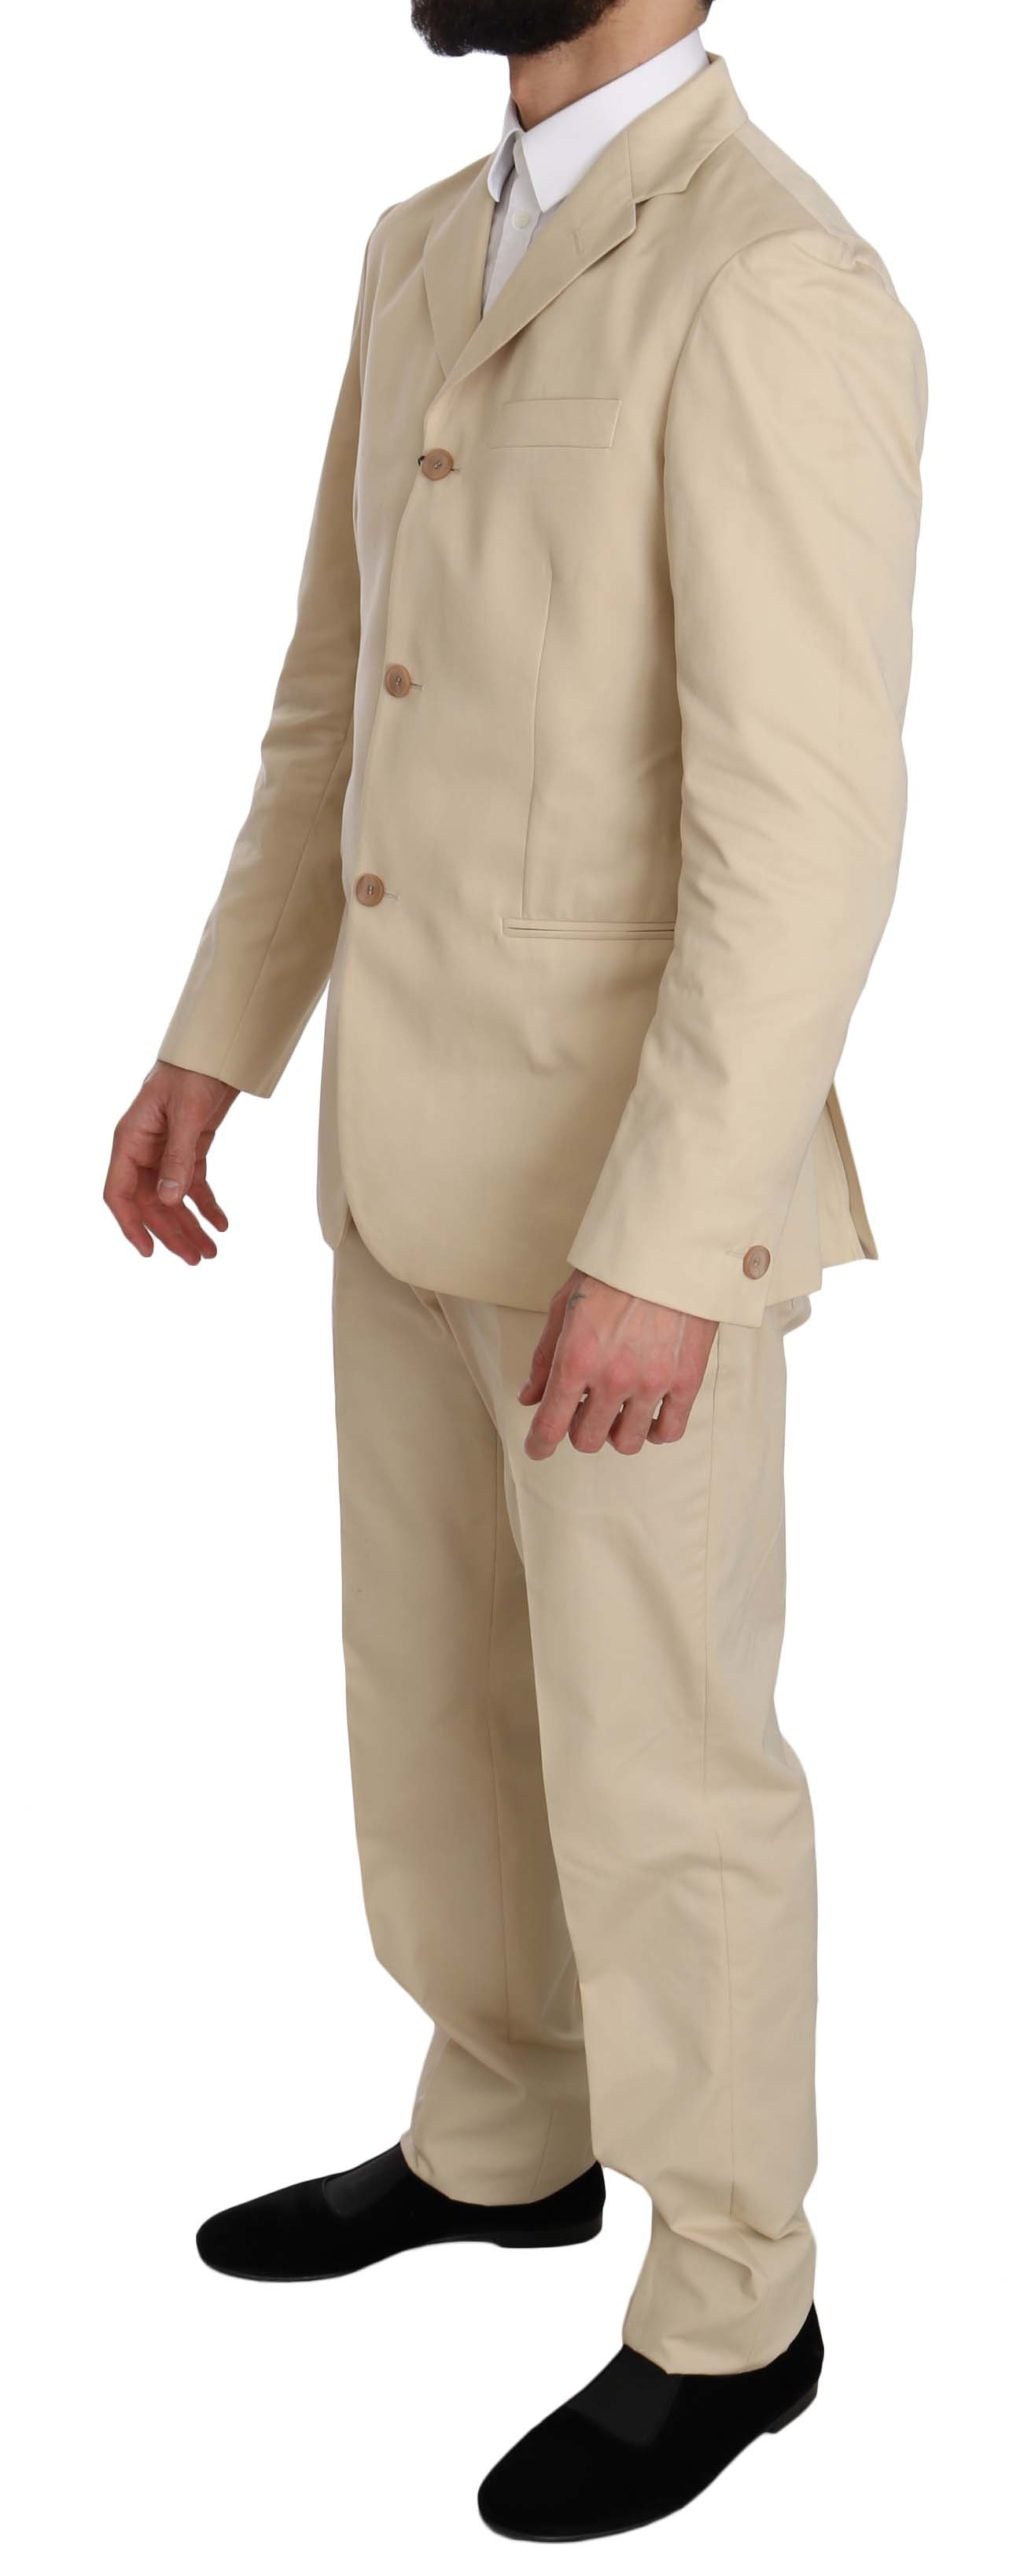 Romeo Gigli Beige Two-Piece Suit with Classic Elegance